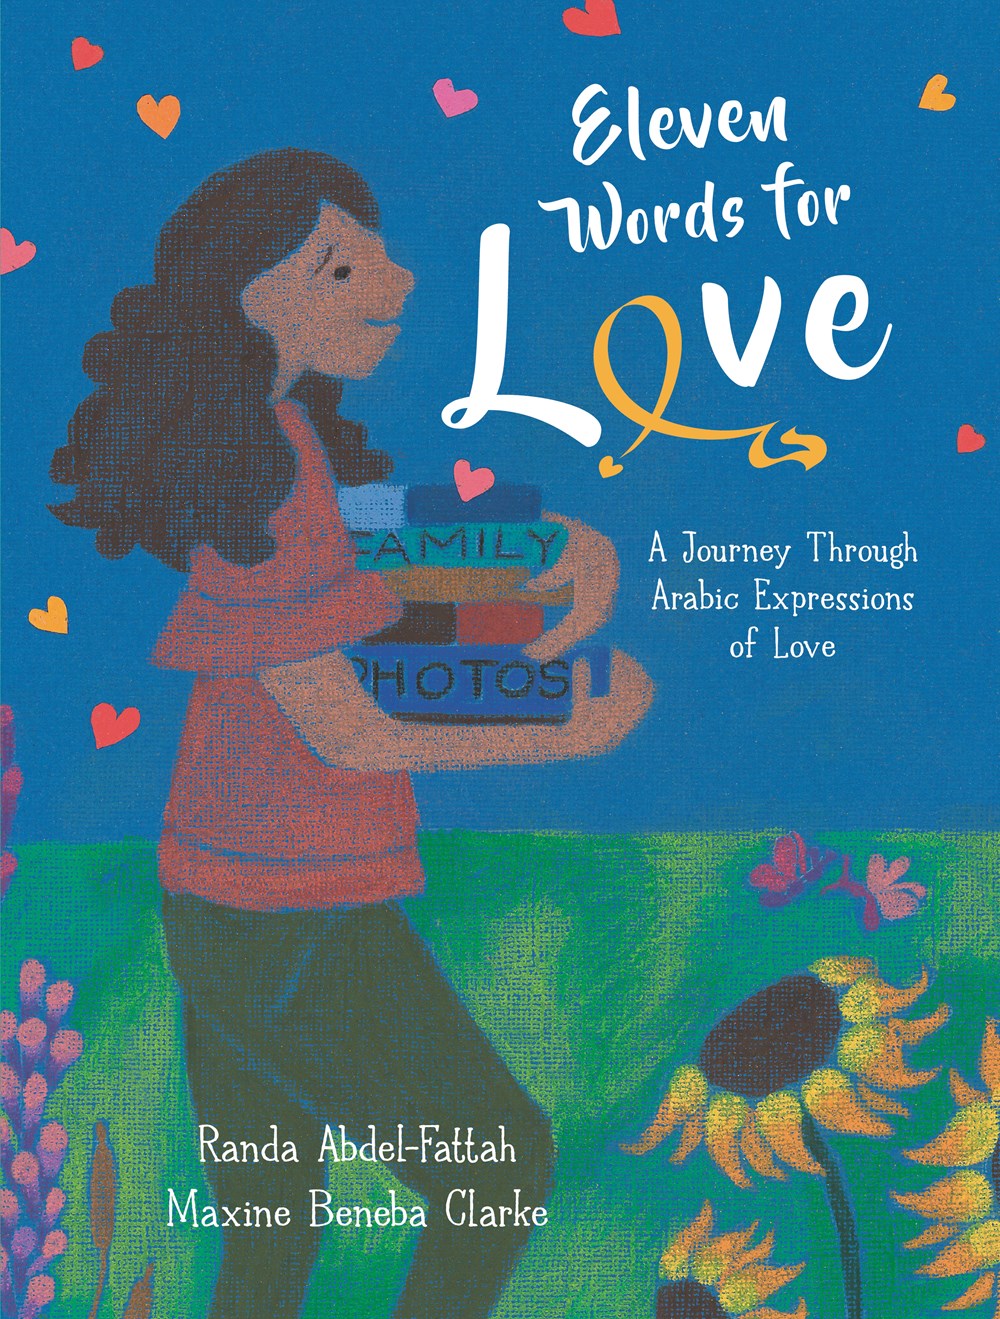 PRE-ORDER: Eleven Words for Love: A Journey Through Arabic Expressions of Love